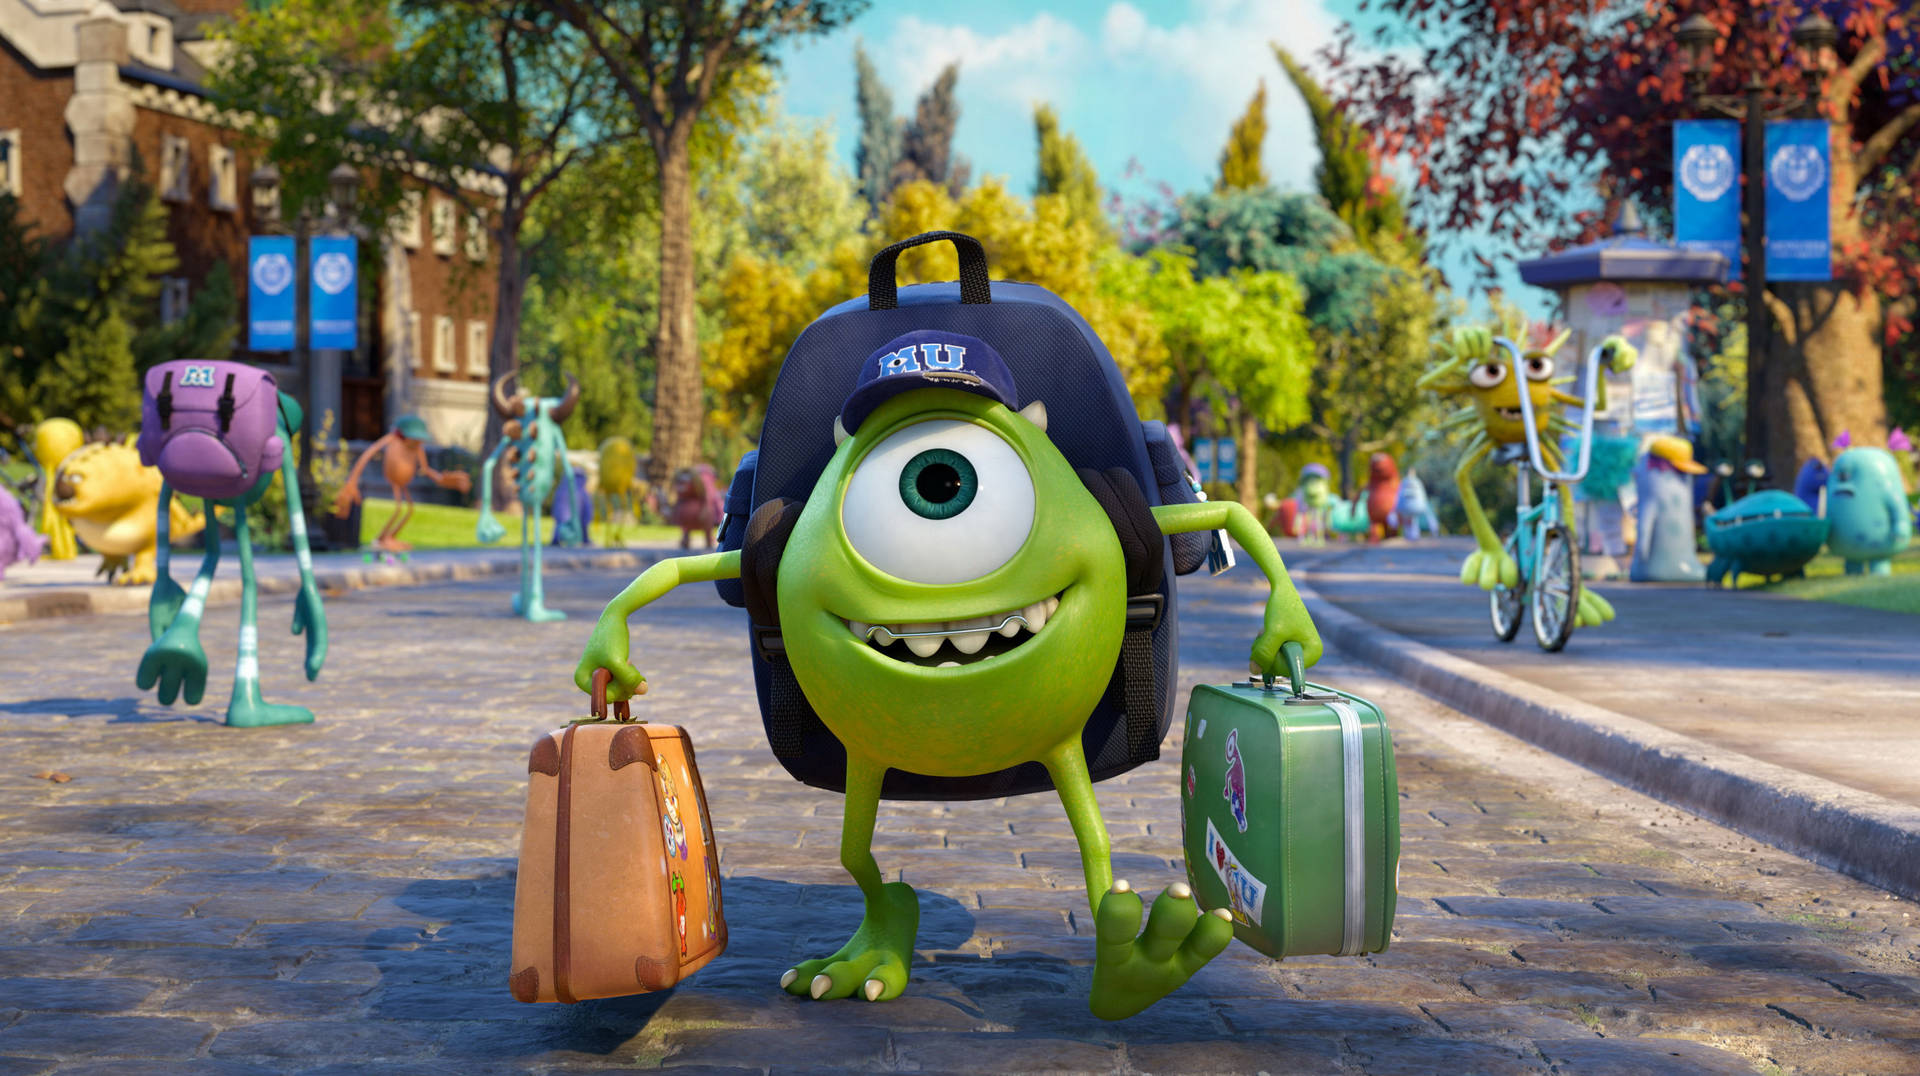 Monstersuniversity Mike Med Resväskor (for A Computer Or Mobile Wallpaper Featuring The Character Mike From The Movie Monsters University Carrying Suitcases). Wallpaper